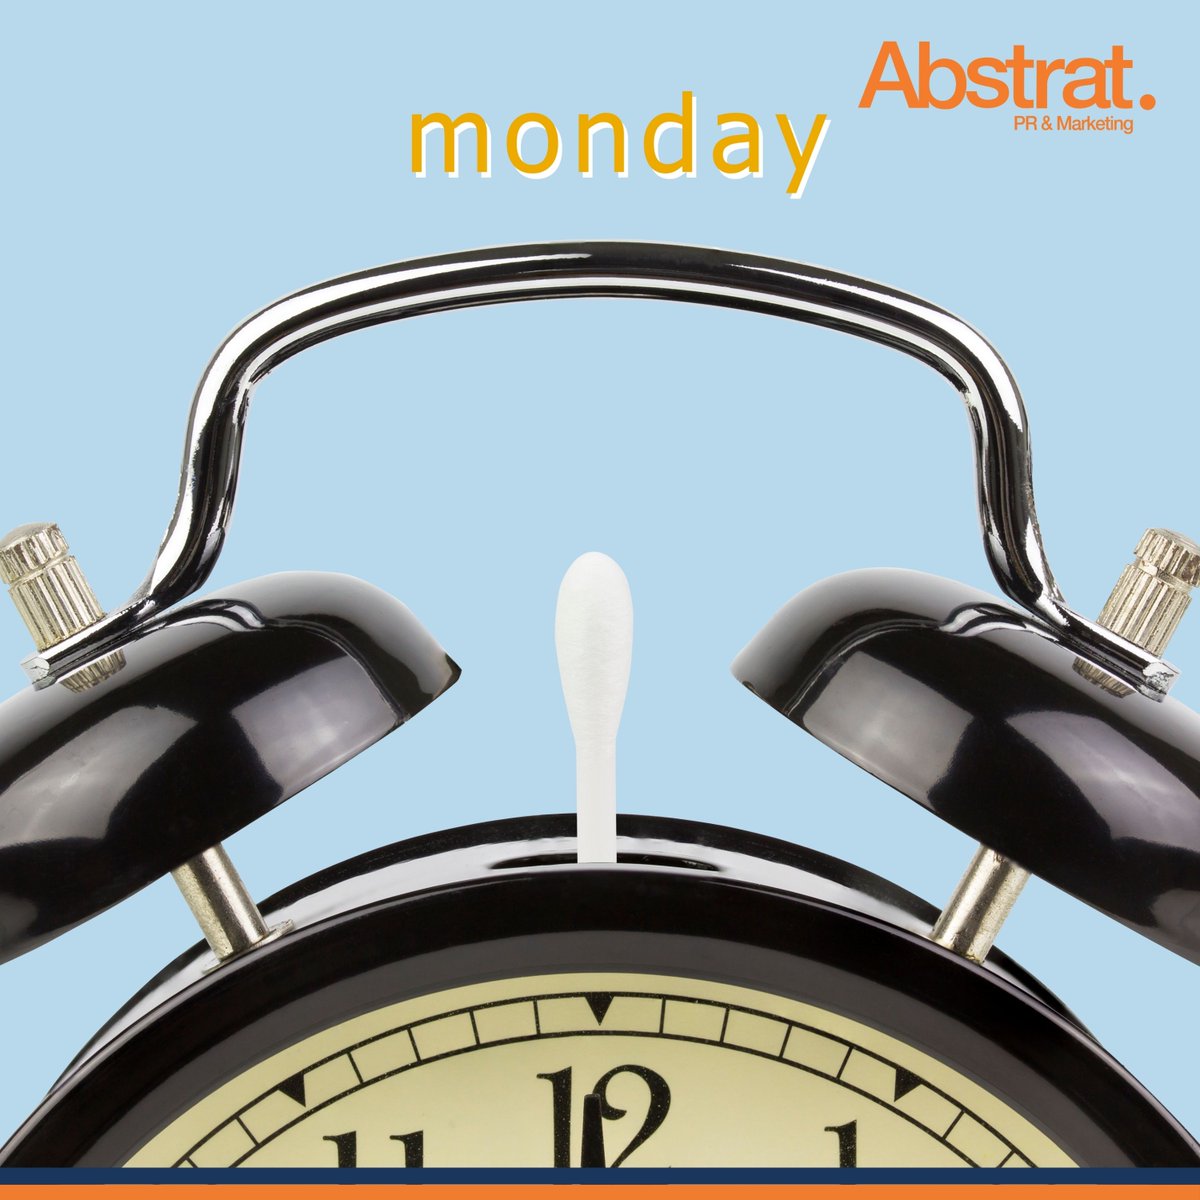 Start the week with energy and enthusiasm, viewing Monday as a chance to create something wonderful and kick-start your journey towards success.

#MondayMood #abstrattz #Mondayvibes